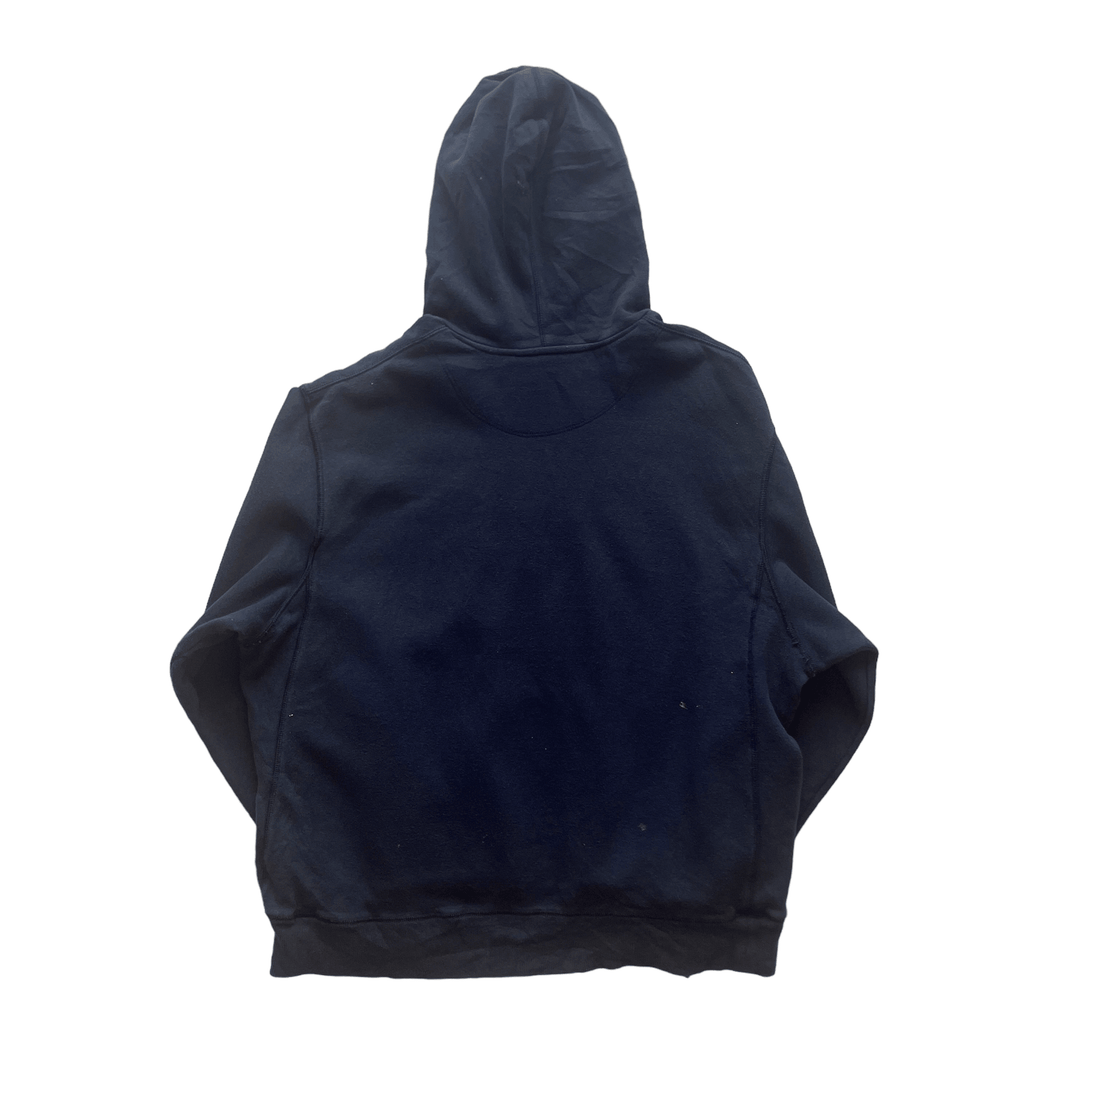 Vintage Navy Blue Nike Berkeley Spell-Out Hoodie - XXL (Recommended Size - Extra Large) - The Streetwear Studio